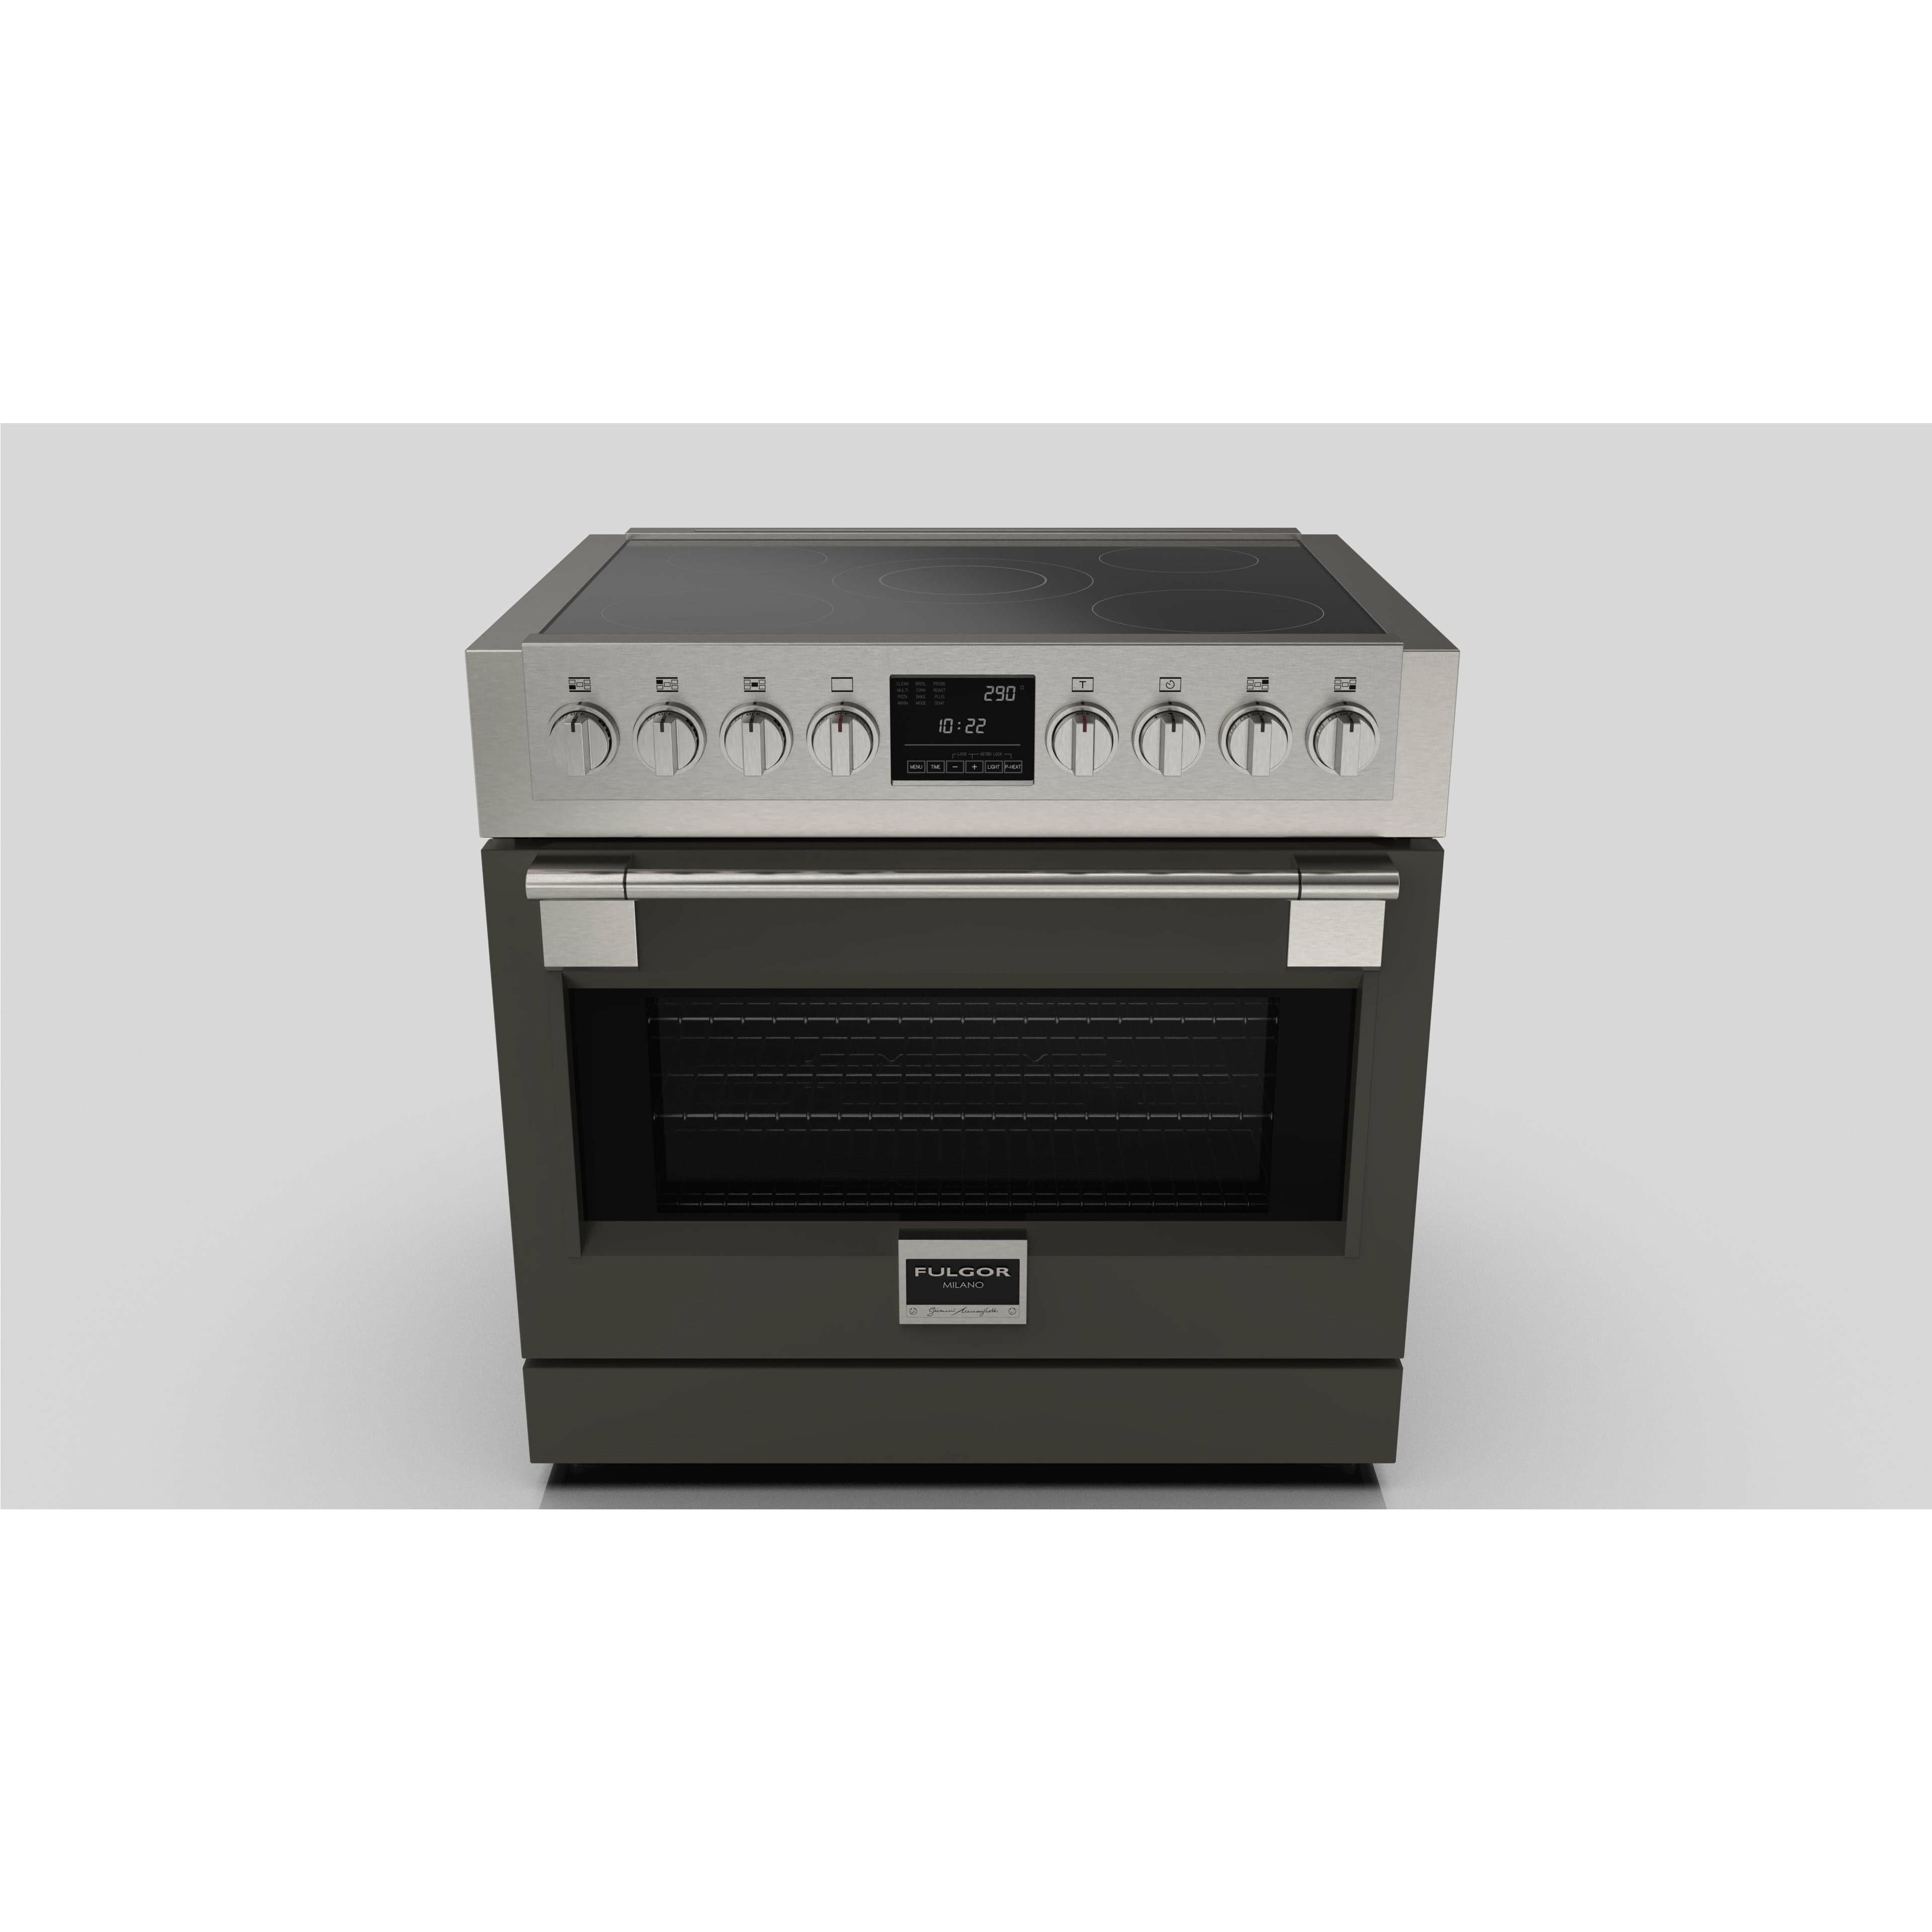 Fulgor Milano 36" Induction Freestanding Pro-Range with 5 Induction Zones, 5.7 Cu. Ft. Capacity - F6PIR365S1 Ranges PDRKIT36MG Luxury Appliances Direct